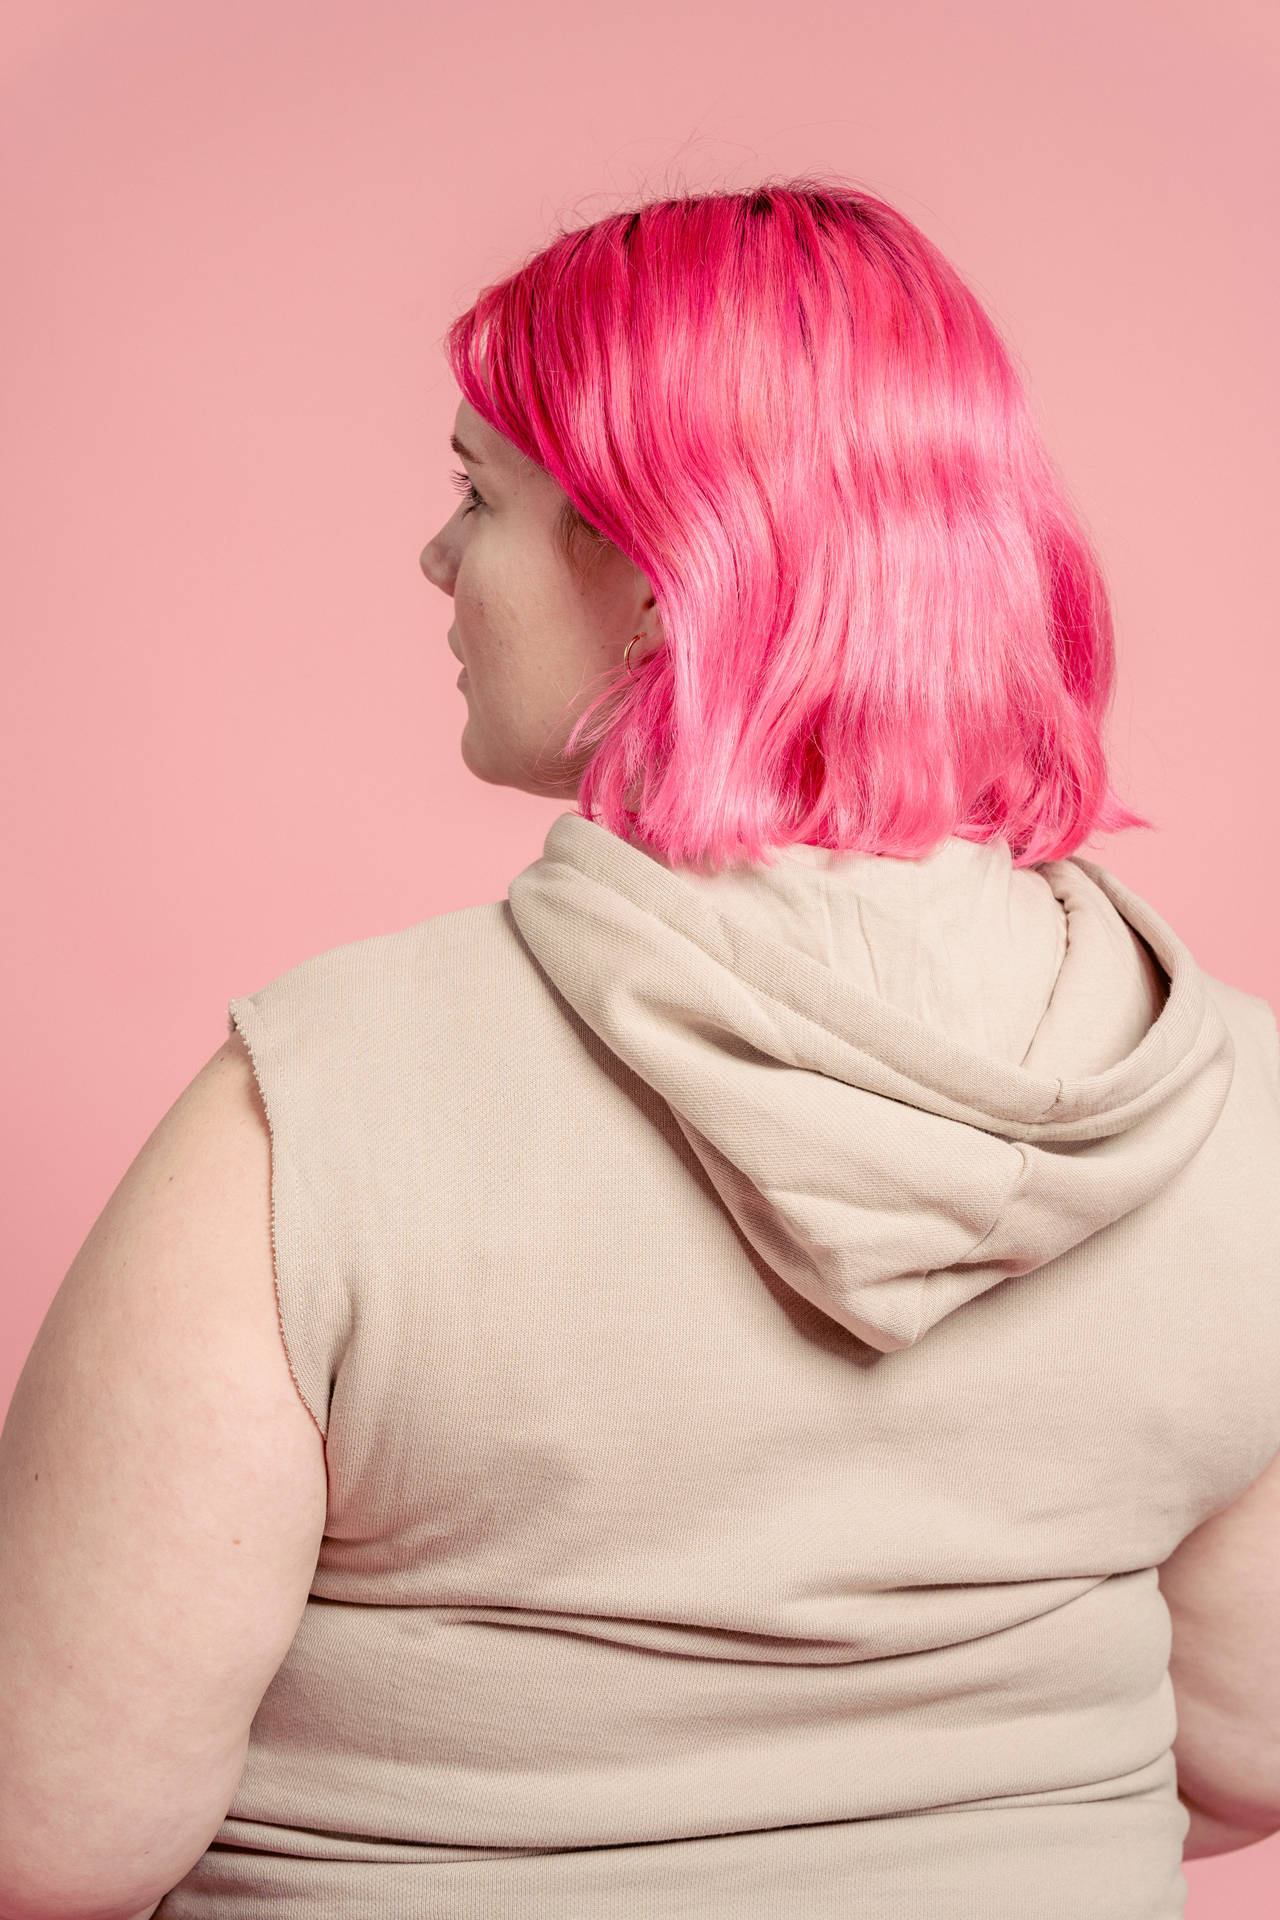 Fat Woman With Pink Hair Wallpaper